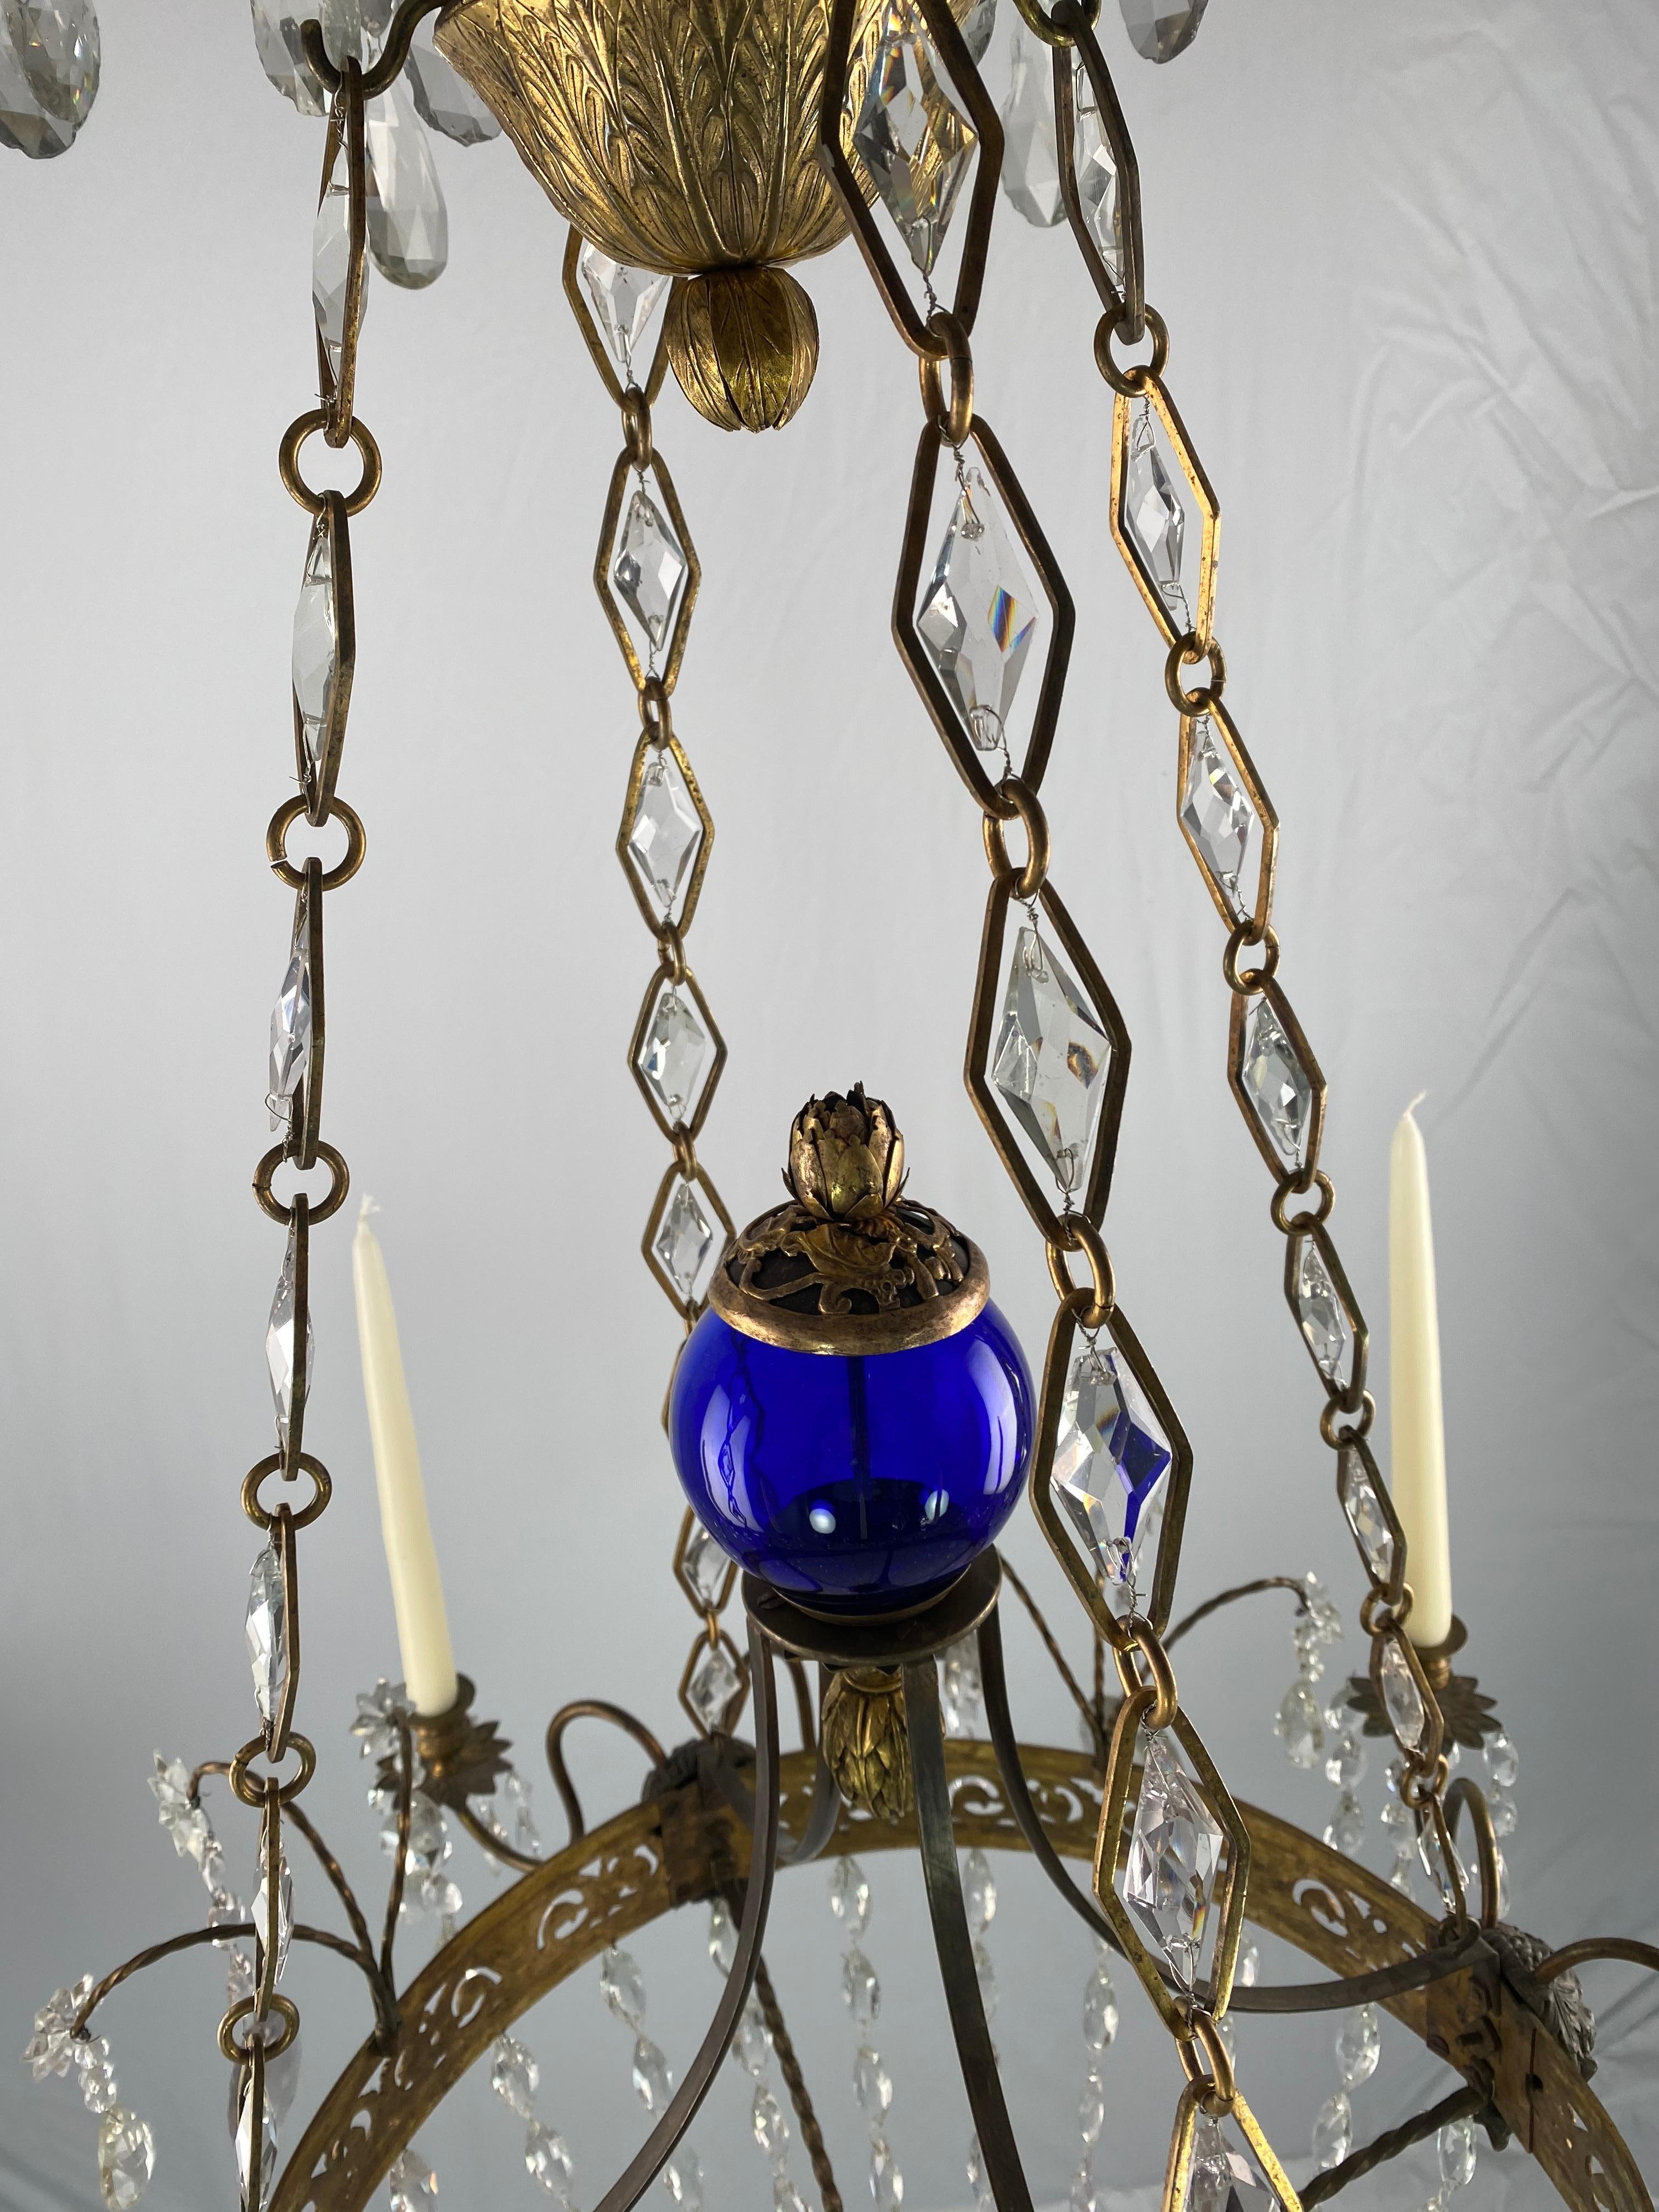 Gilt Russian Empire Chandelier, Early 19th C